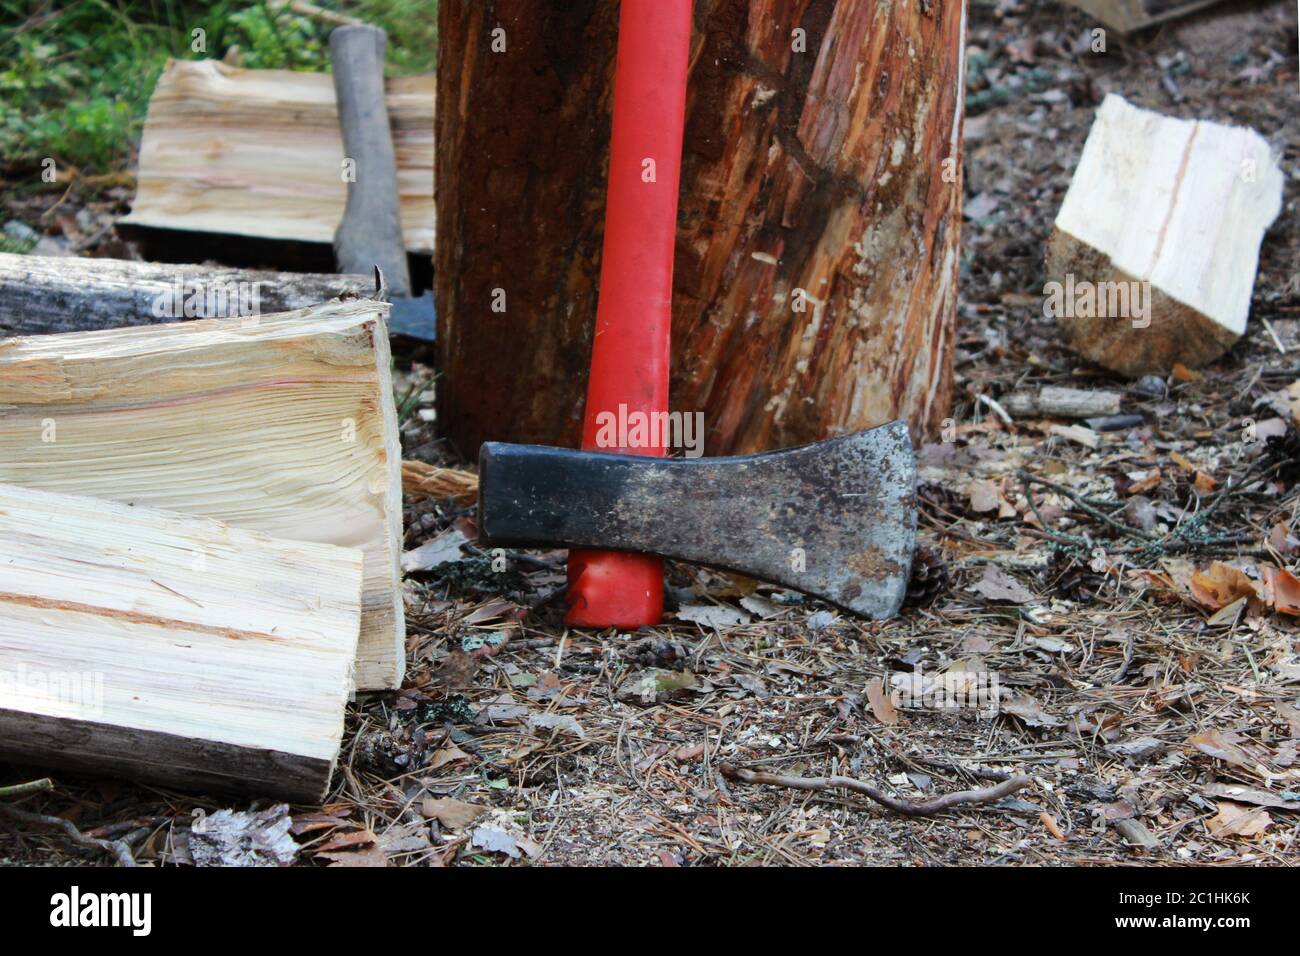 big ax with a red handle stands in the forest leaning against a wooden stump. for cooking firewood. Stock Photo